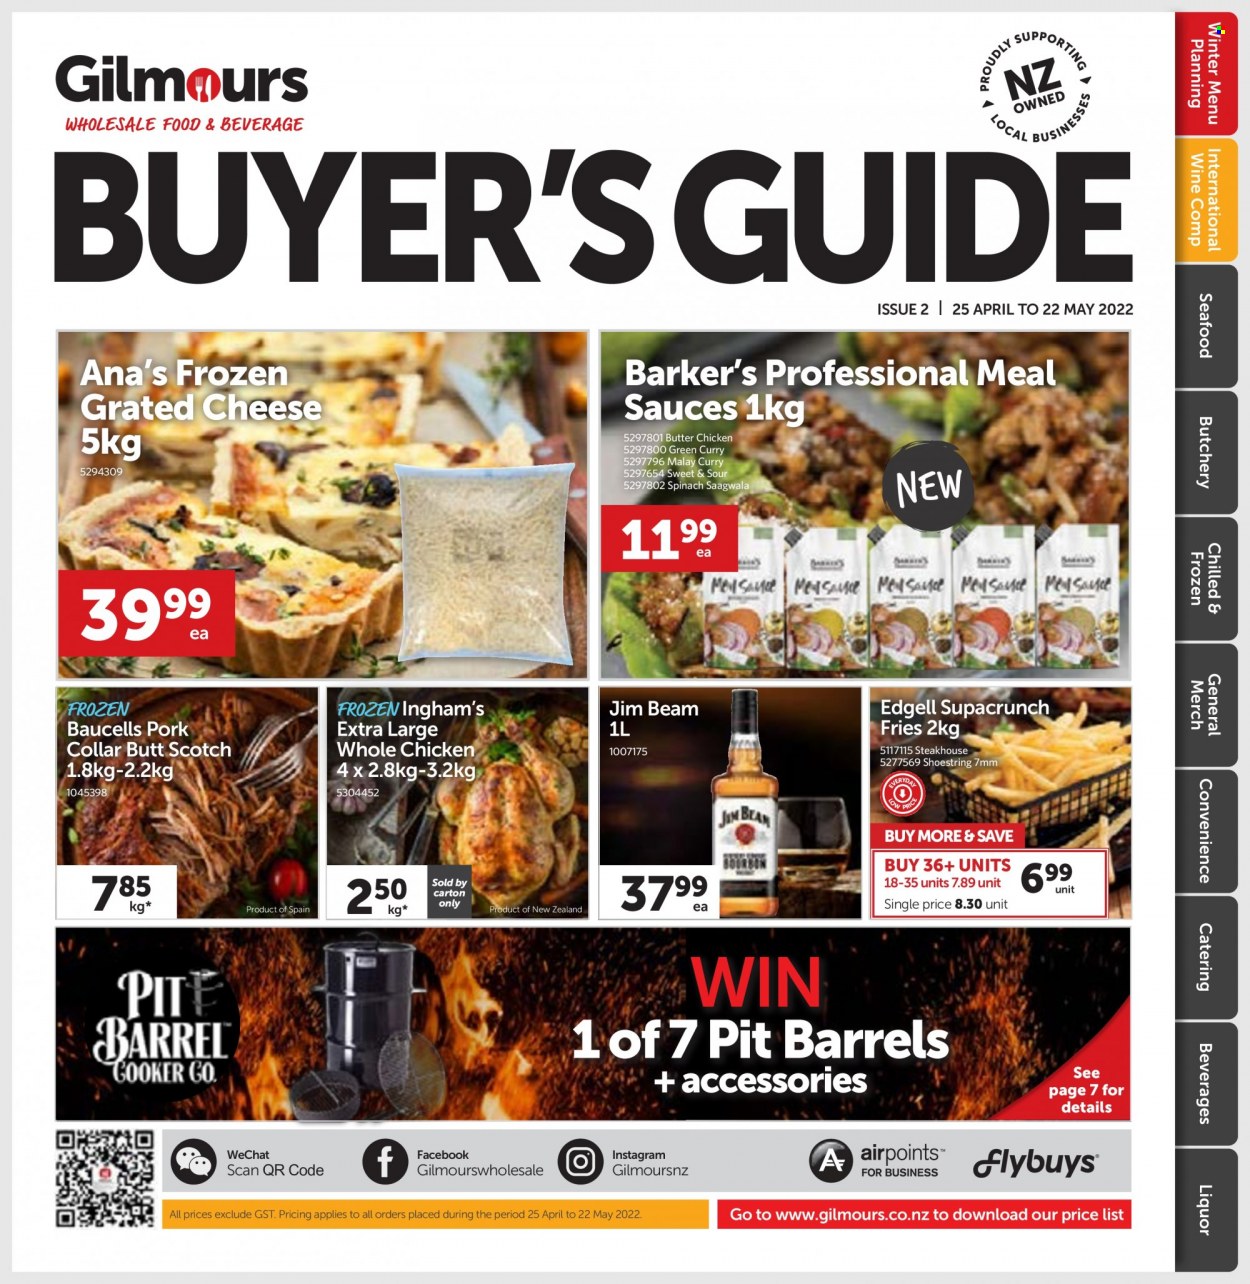 thumbnail - Gilmours mailer - 25.04.2022 - 22.05.2022 - Sales products - seafood, cheese, grated cheese, potato fries, wine, liquor, Jim Beam, whole chicken. Page 1.